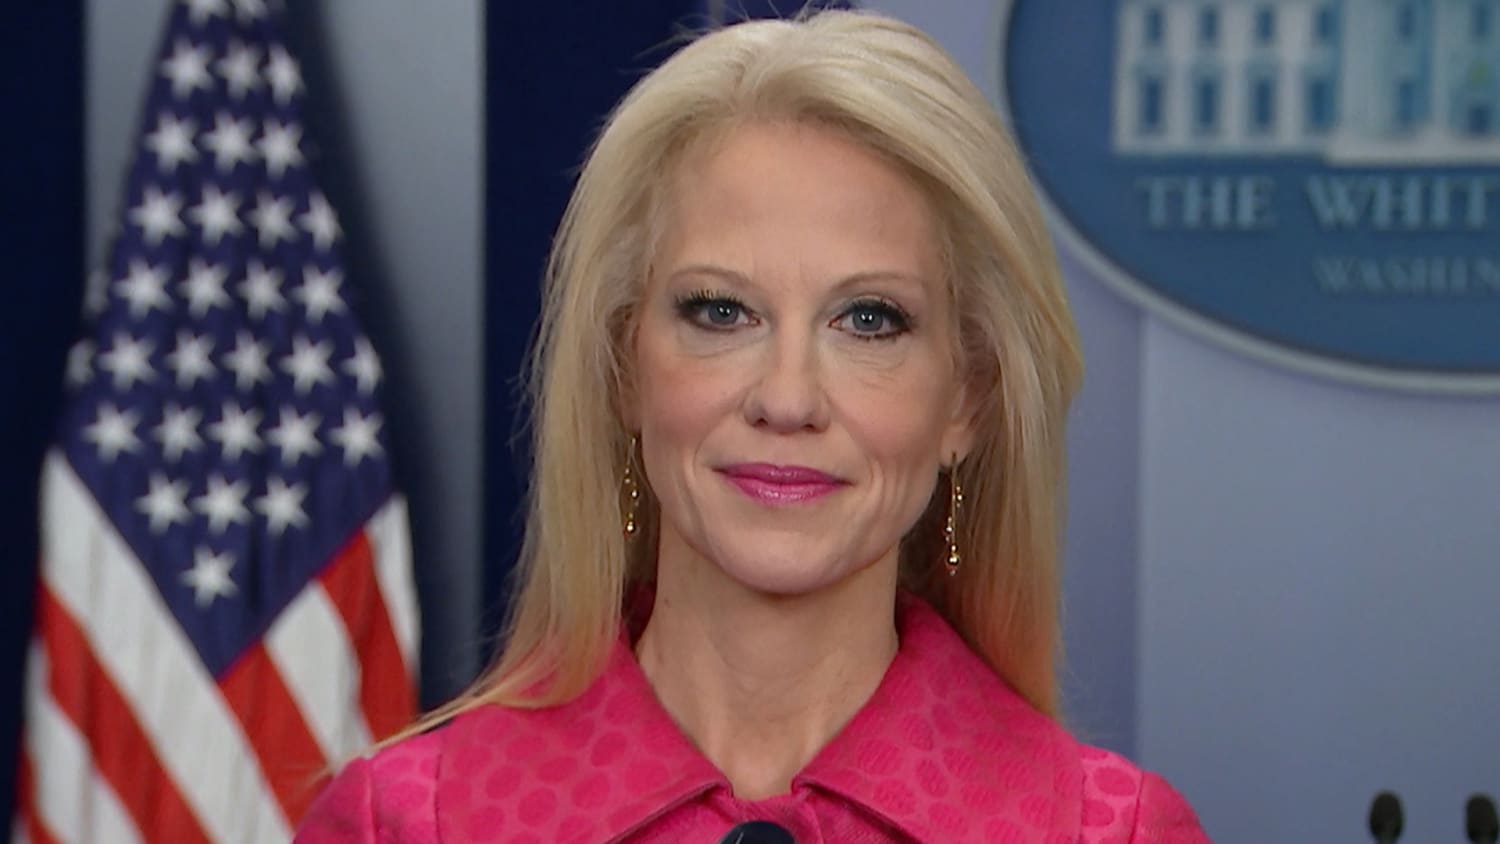 Kelly ann conway facelift